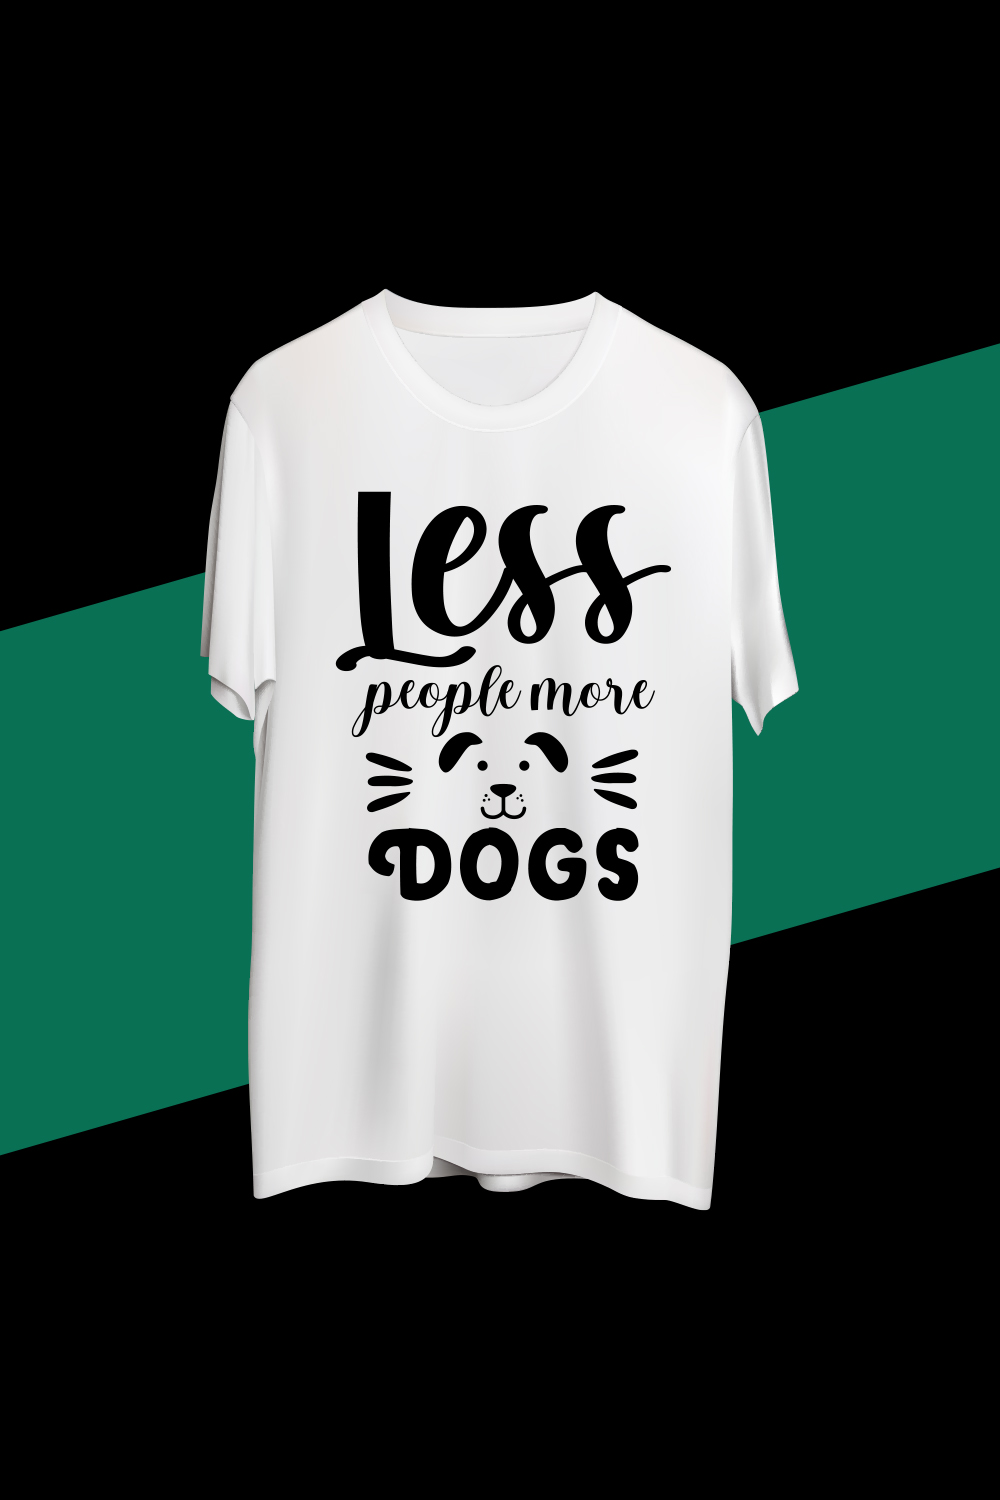 Less people more dogs T-shirt design pinterest preview image.